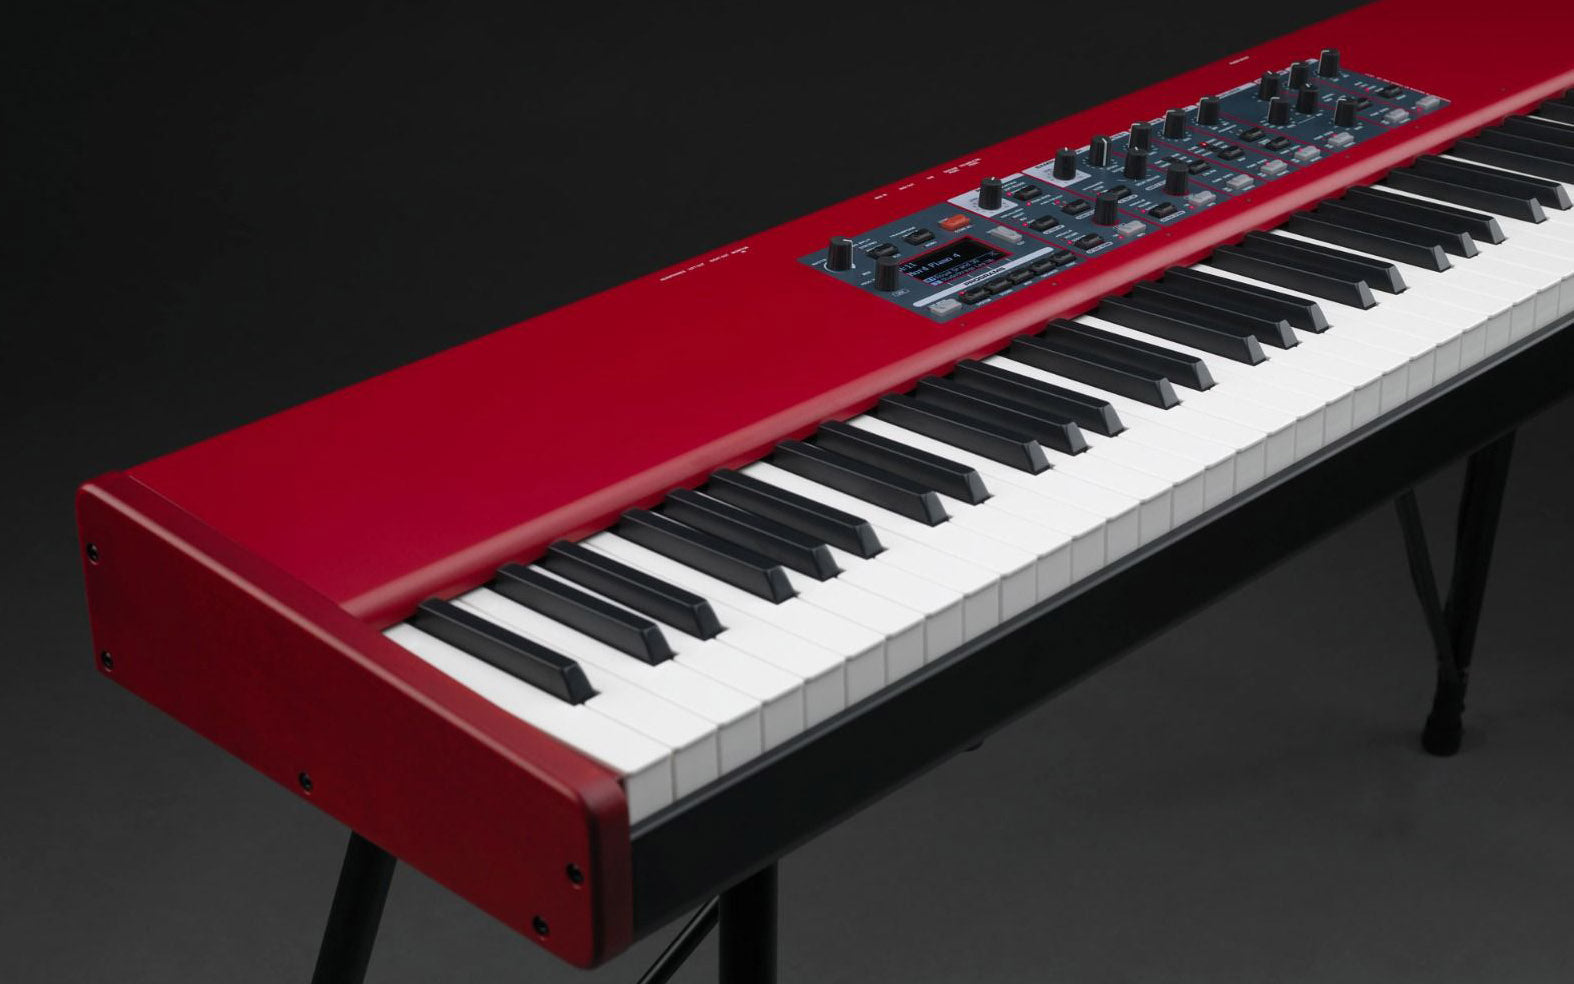 Nord Piano 4 Inherits Flagship Features